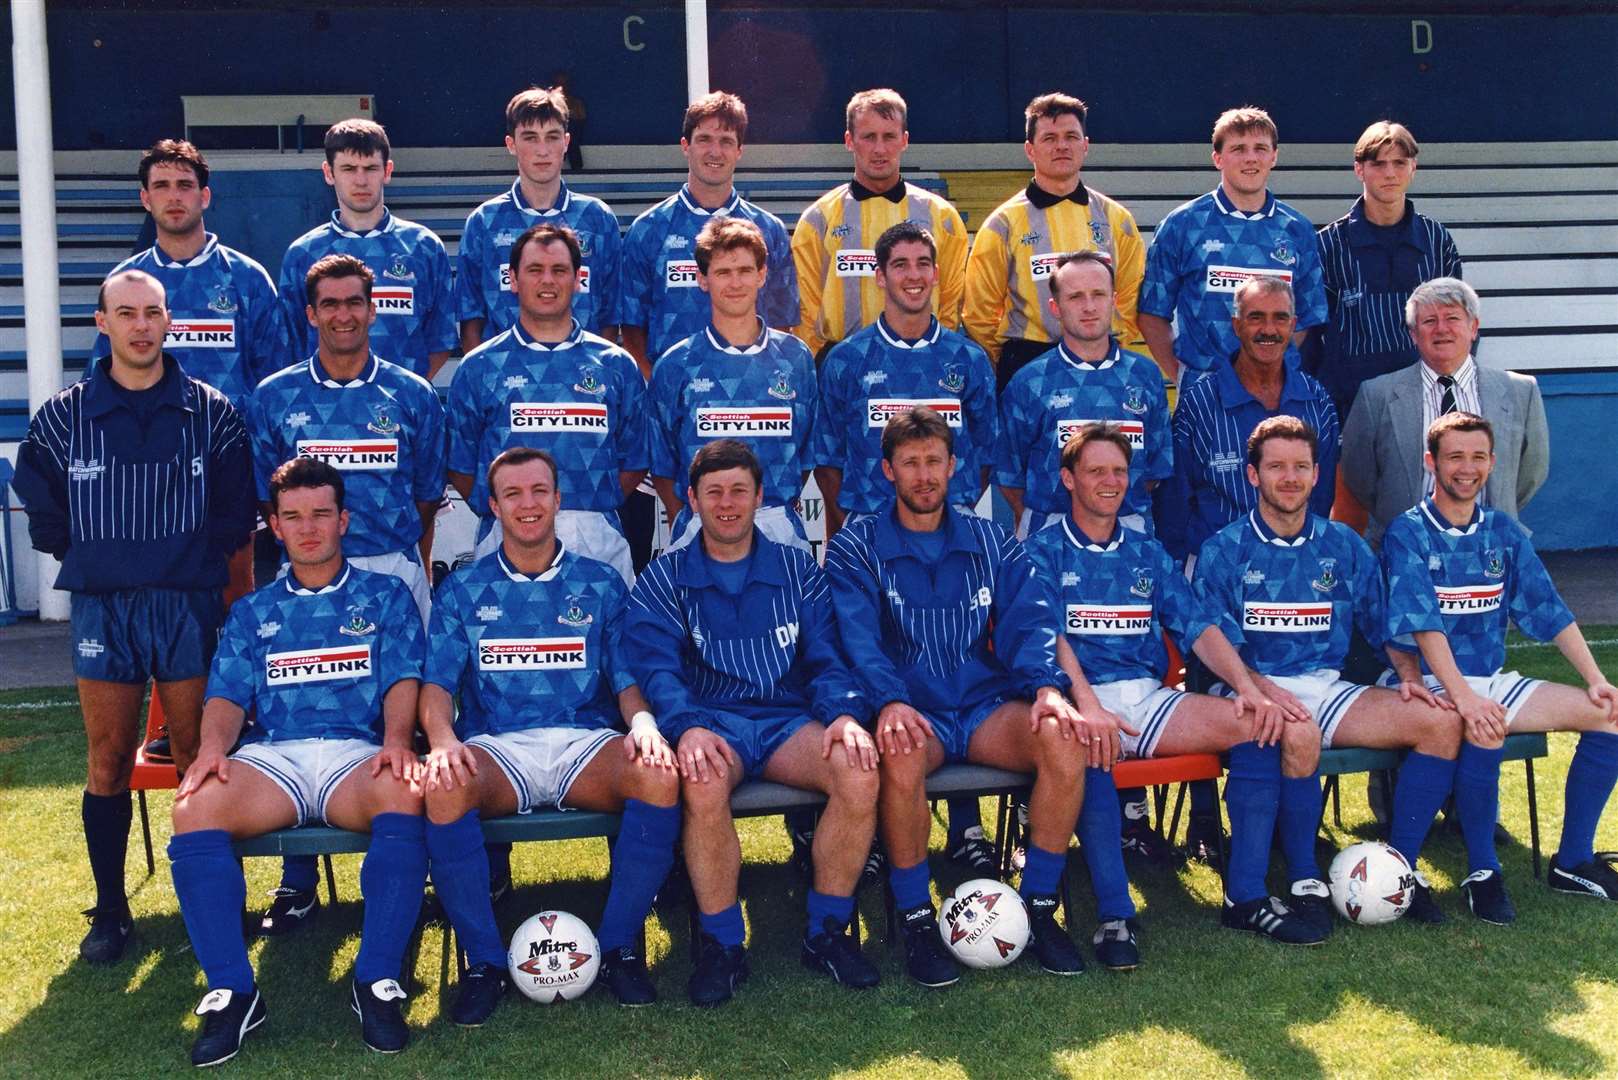 Mark McRitchie (left of two goalkeepers, back row) was part of Caley Thistle's first Scottish League team in 1994-95. Picture: Ken Macpherson